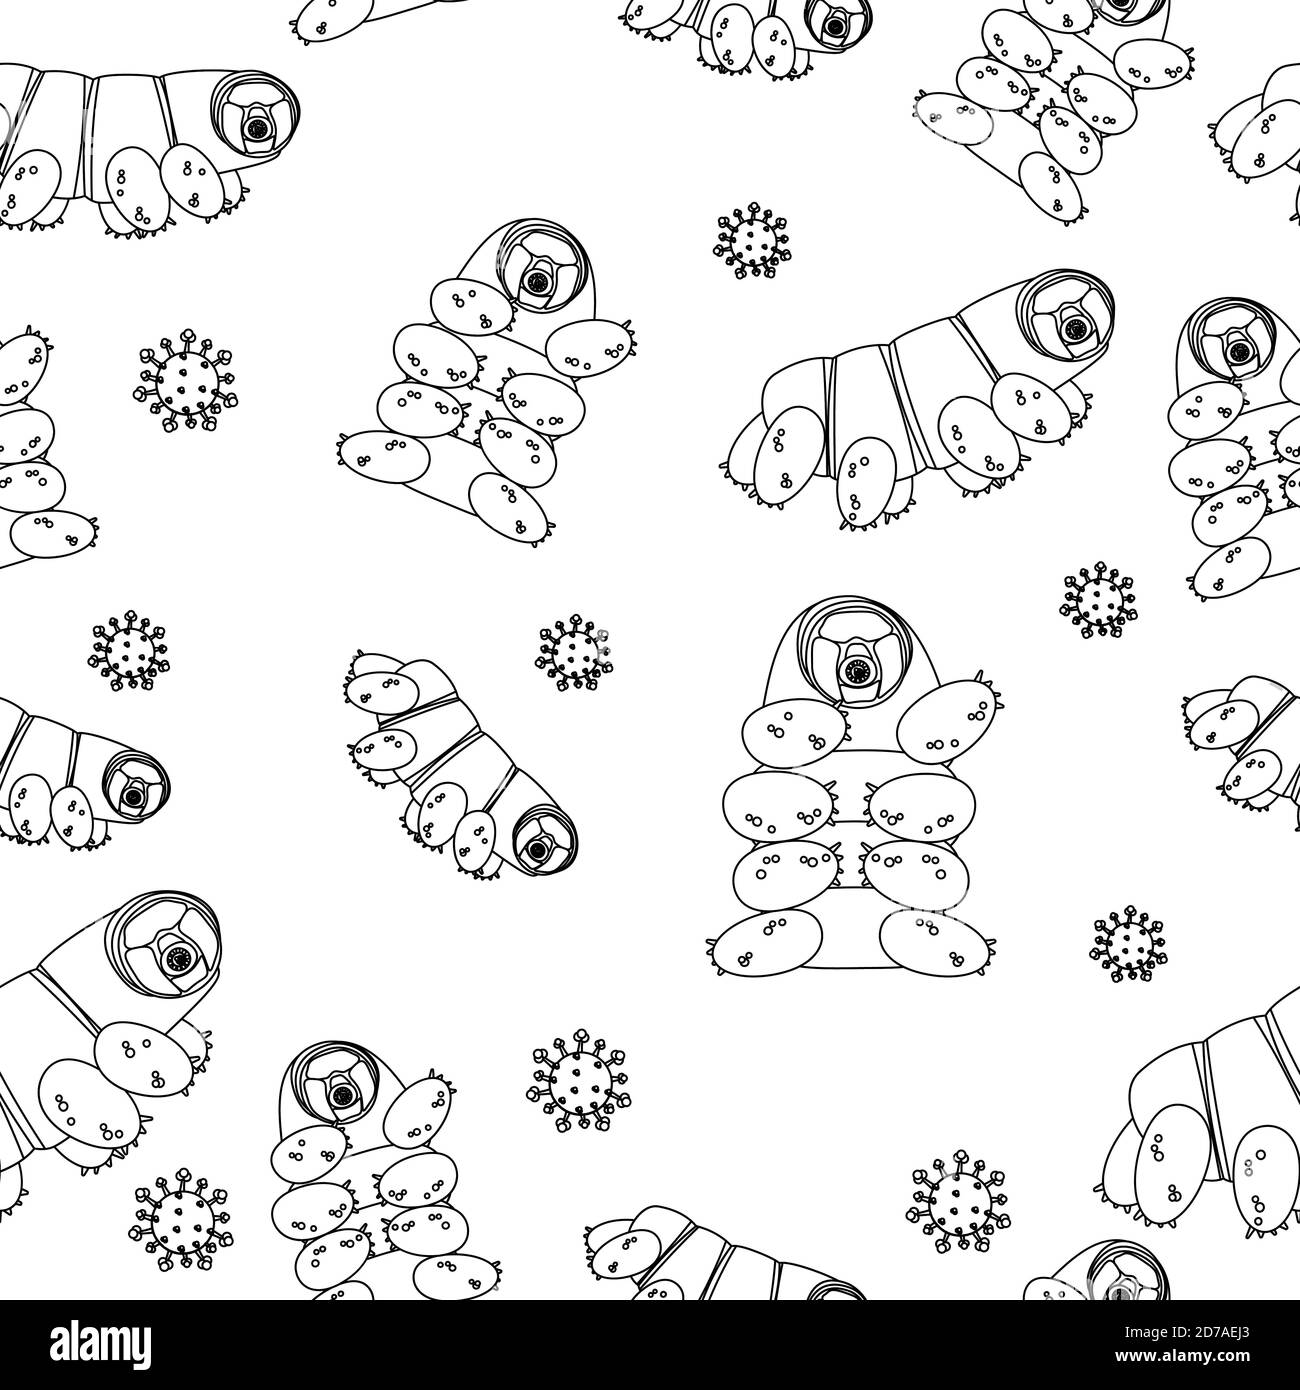 White with black border cute happy Tardigrade, water bears or moss piglets vector repeat seamless pattern on white background Stock Vector